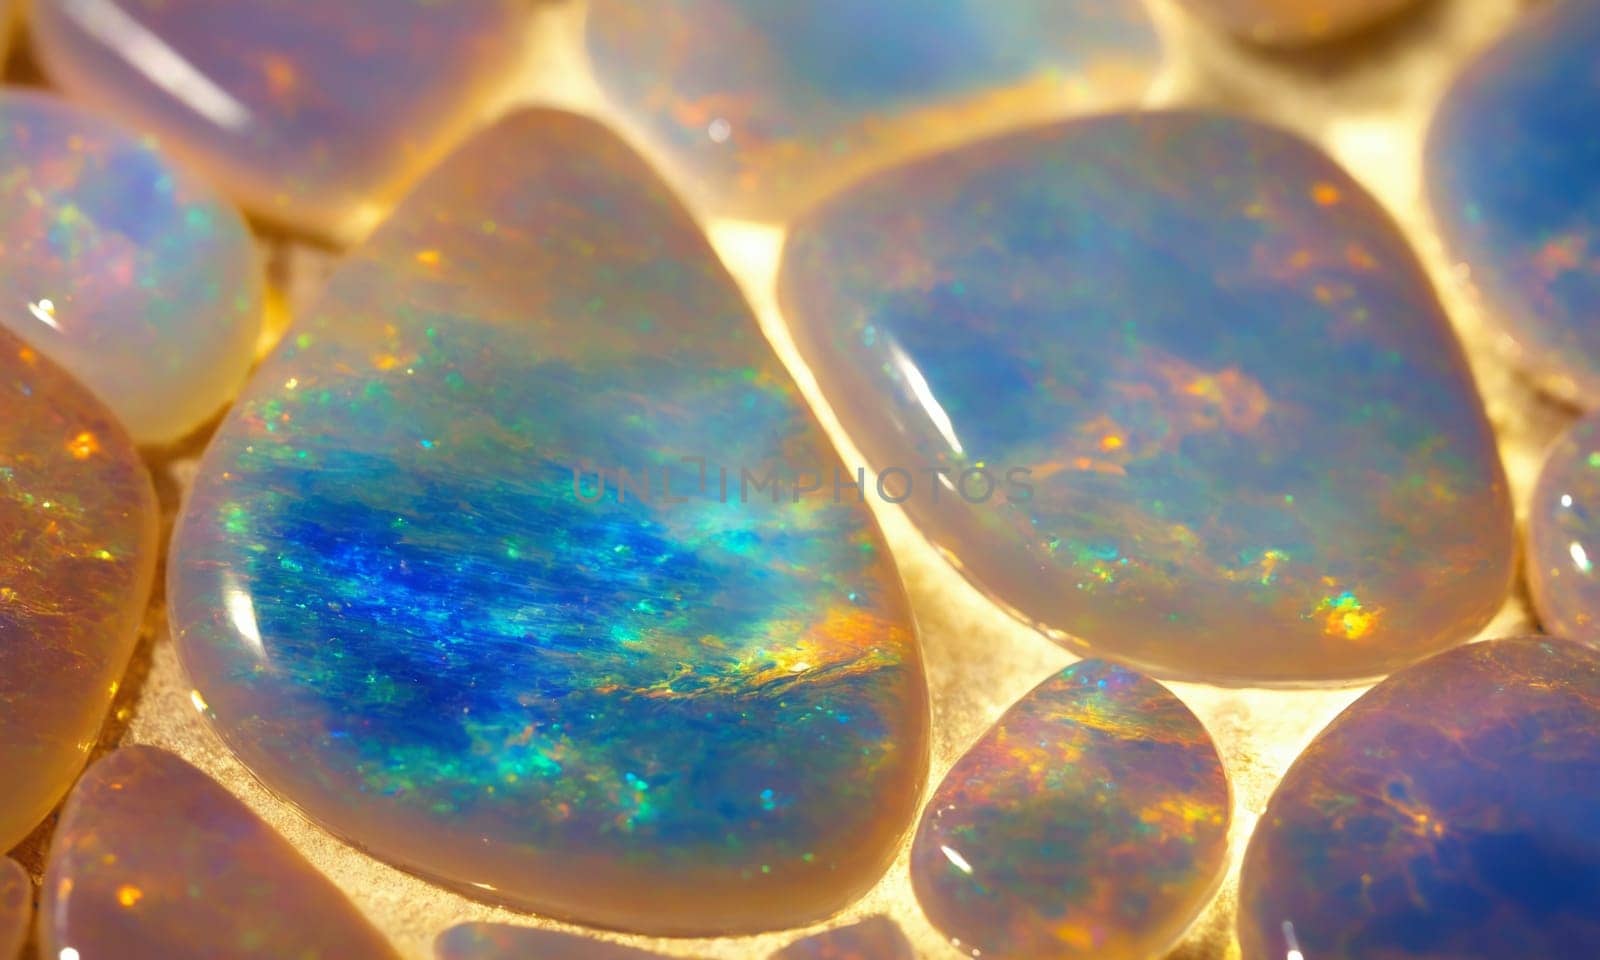 Opal texture for background or design piece of art. by Andre1ns